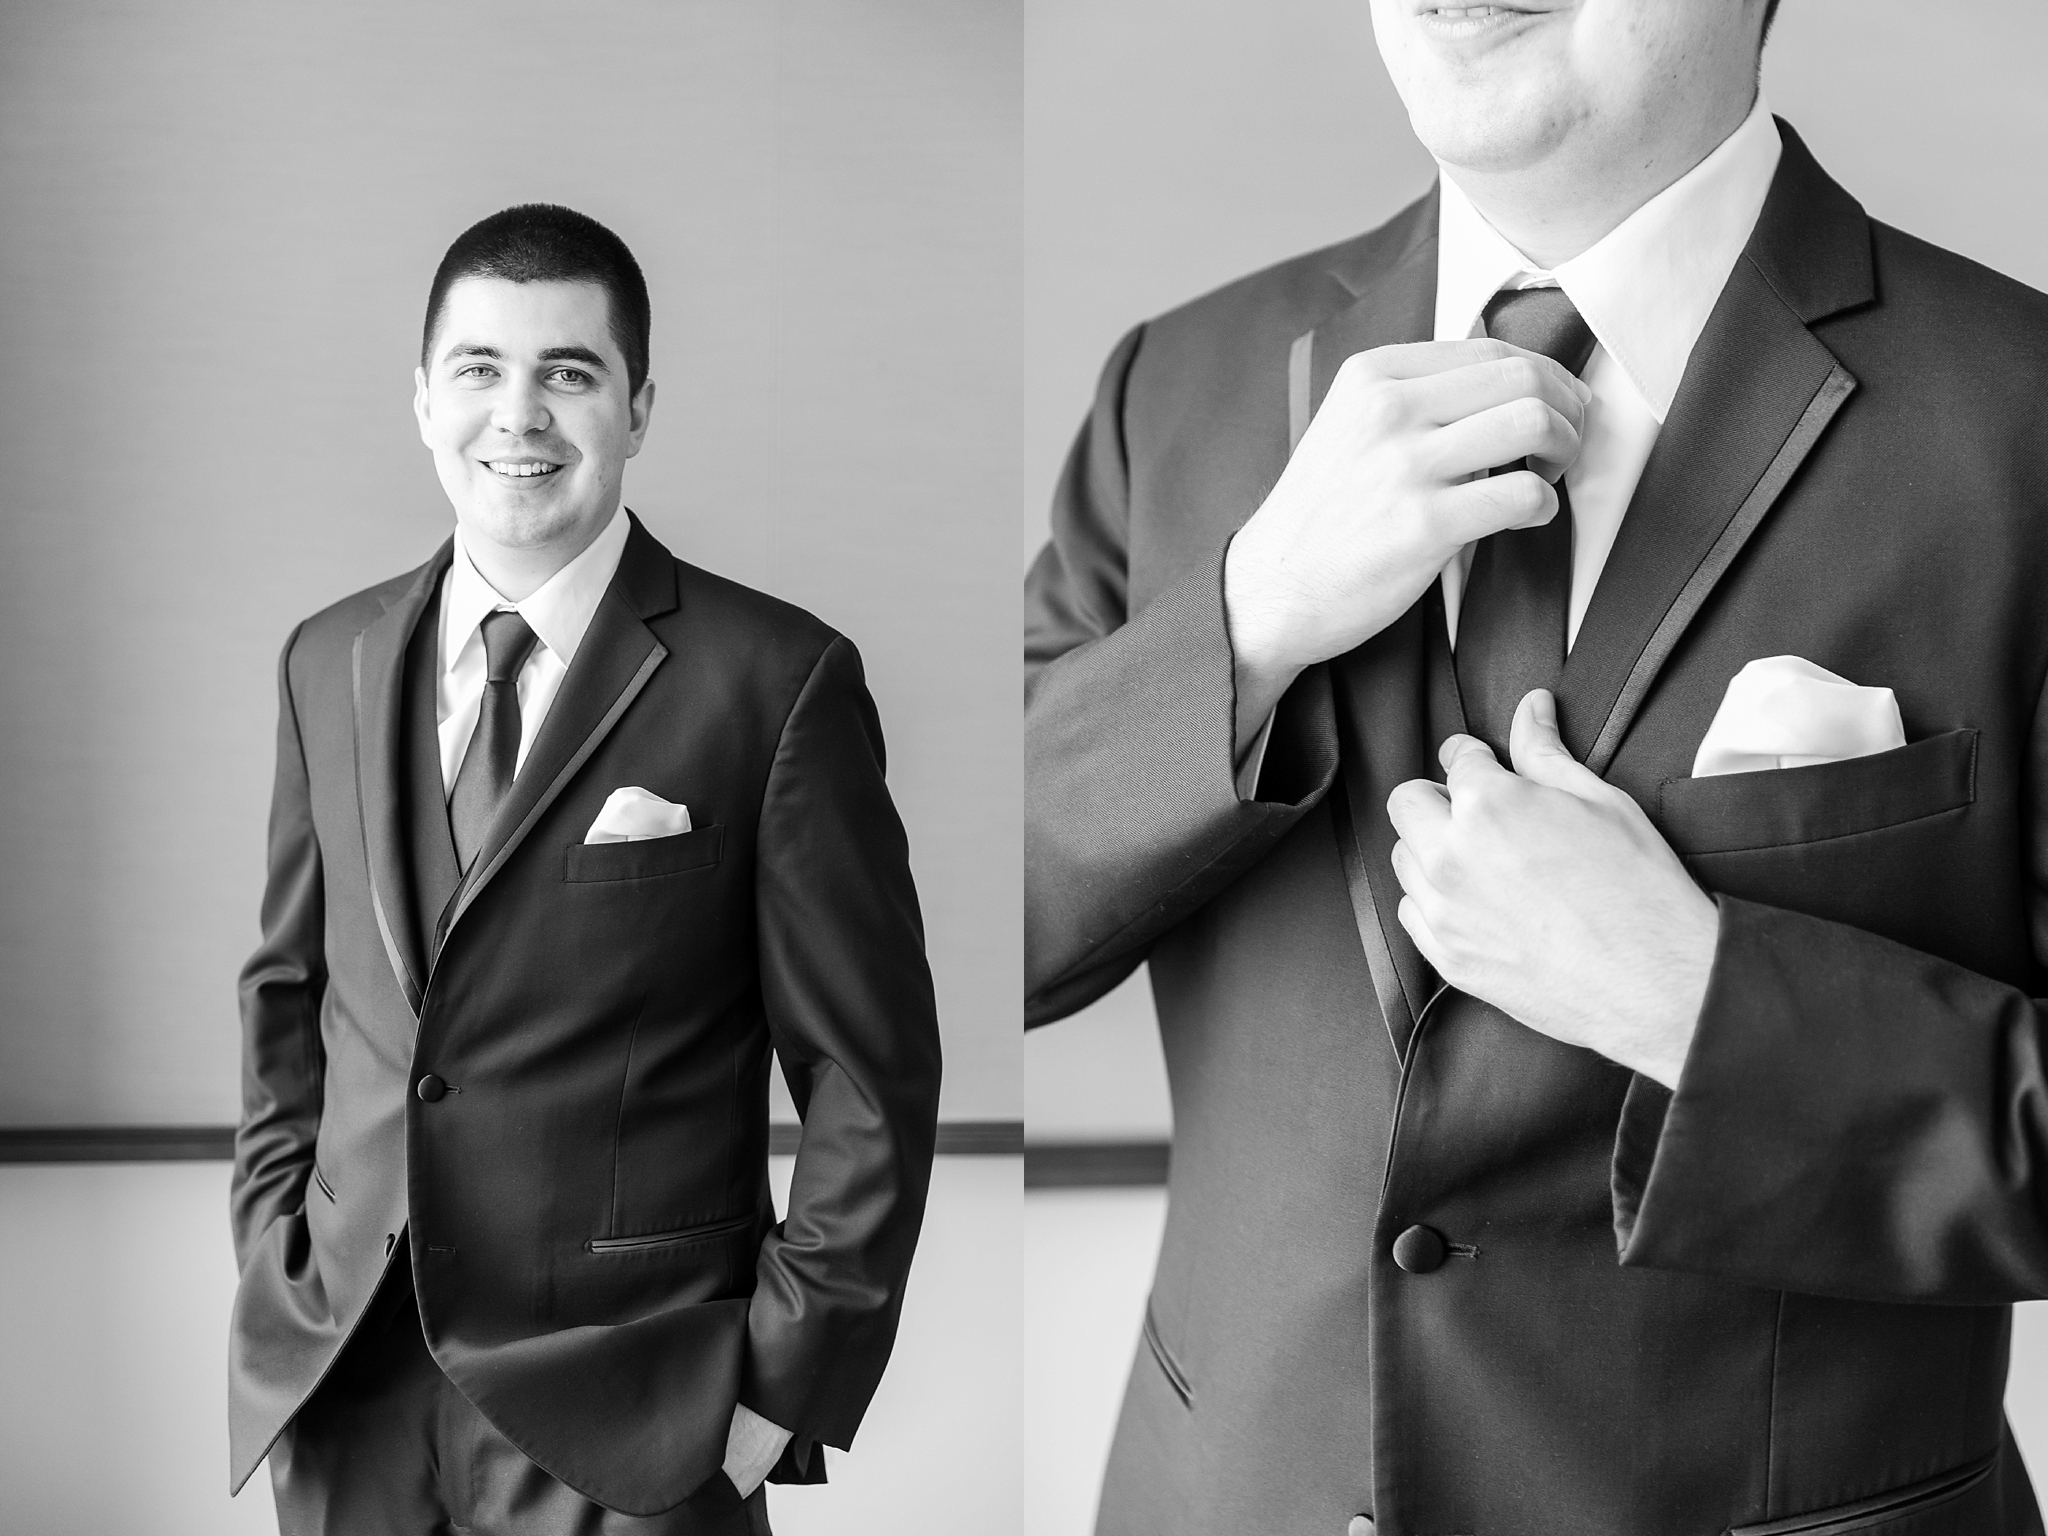 candid-romantic-wedding-photos-at-the-h-hotel-in-midland-michigan-by-courtney-carolyn-photography_0006.jpg